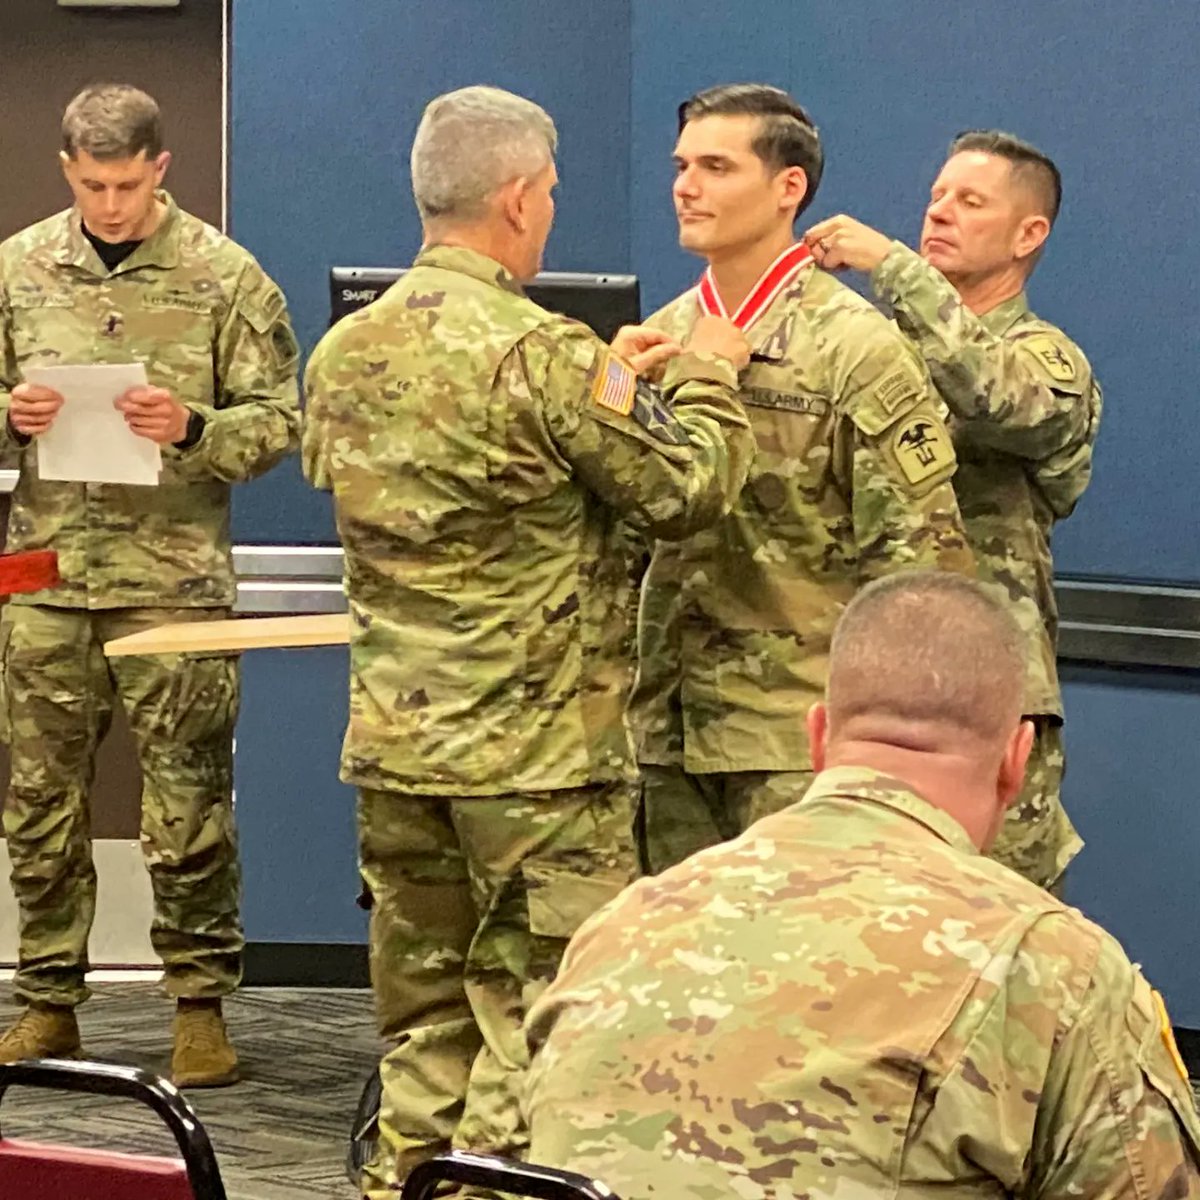 On 12 May RCSM Brennan attended the award ceremony of SFC VanAlstyne who was awarded the Bronze de Fleury the MSM and the Military Outstanding Volunteer Service medal.  SFC VanAlstyne was an instructor at  @Official_Sapper

📷 SGT Macaela Perry. 
#SelflessService 
#ArmyLeadership